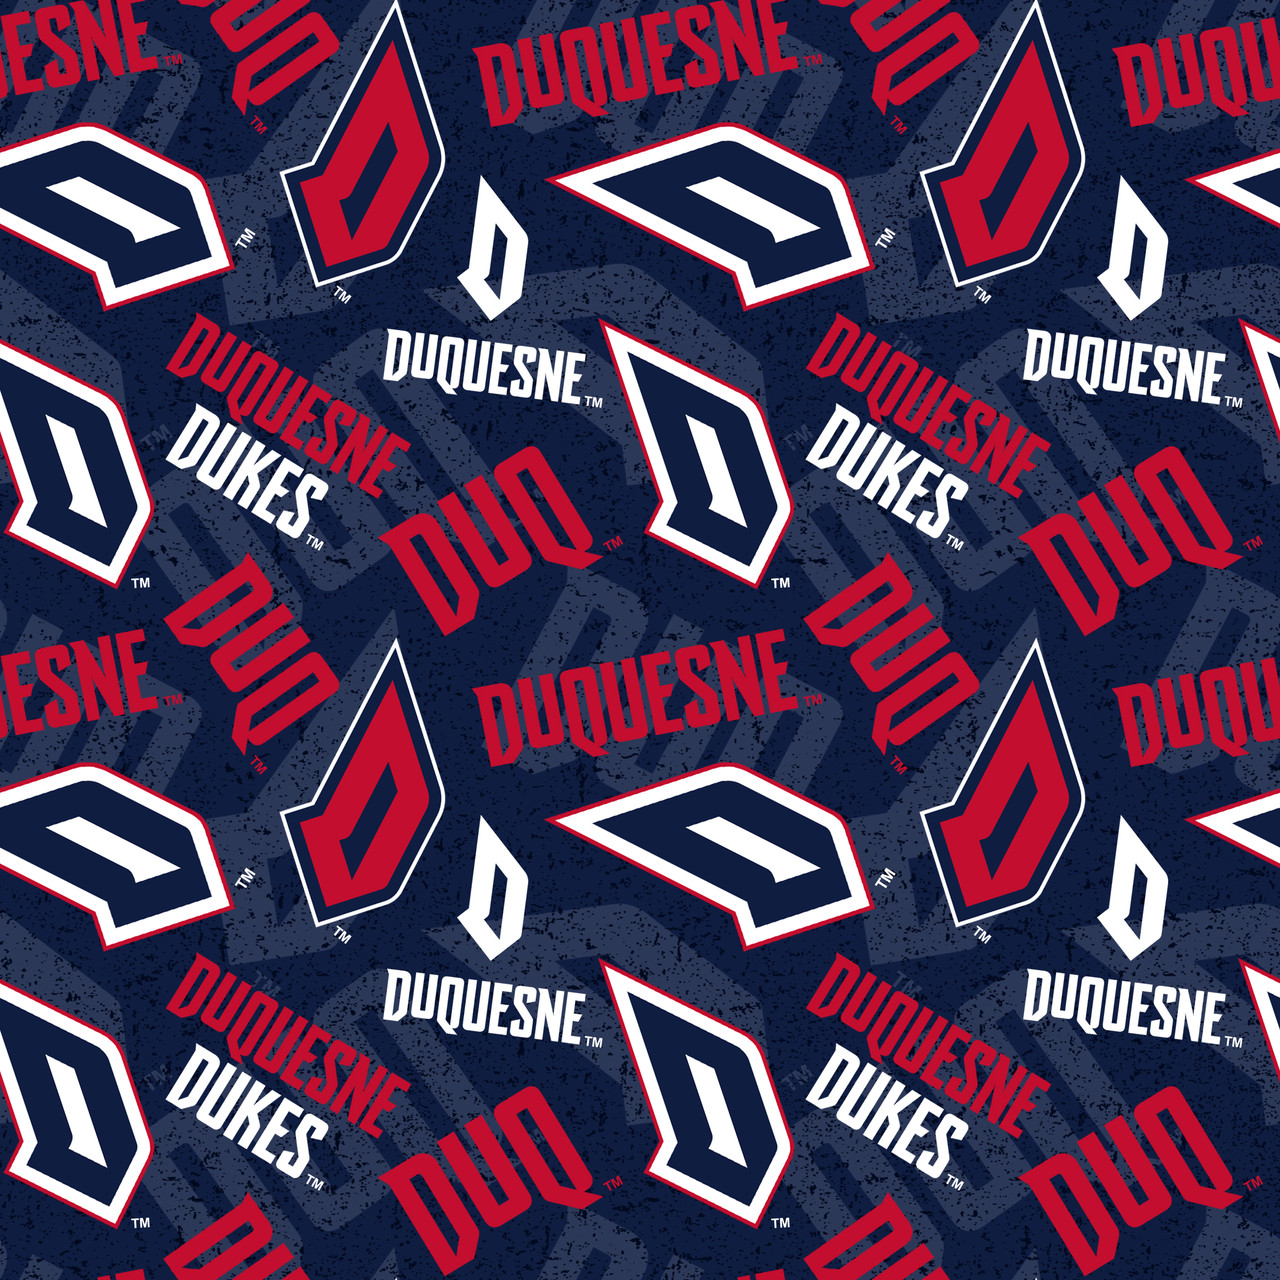 Duquesne University Dukes Cotton Fabric with Tone On Tone Print or Matching Solid Cotton Fabrics